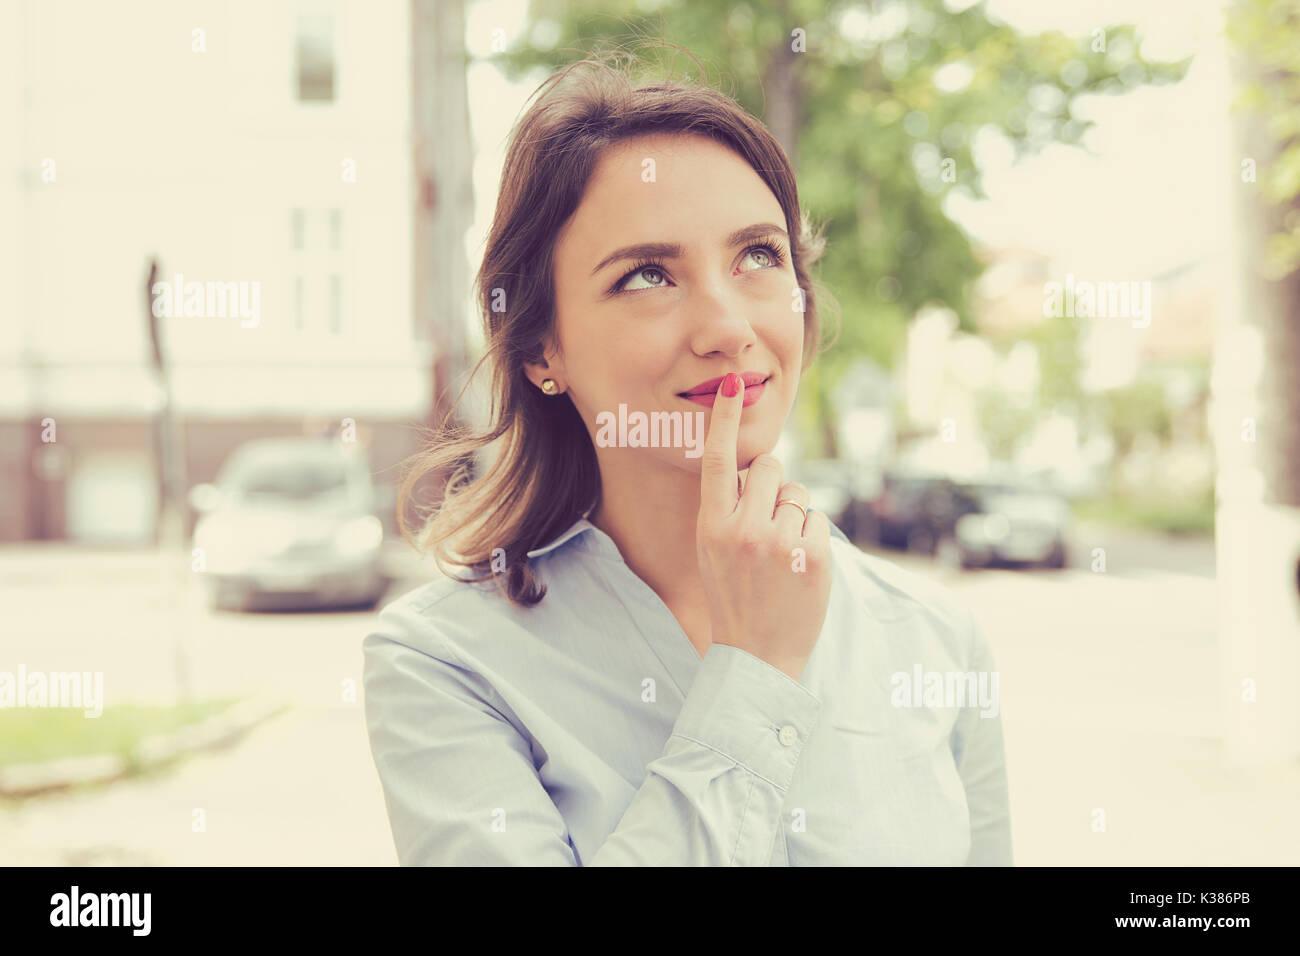 Woman thinking and looking sideways standing on a city street Stock Photo